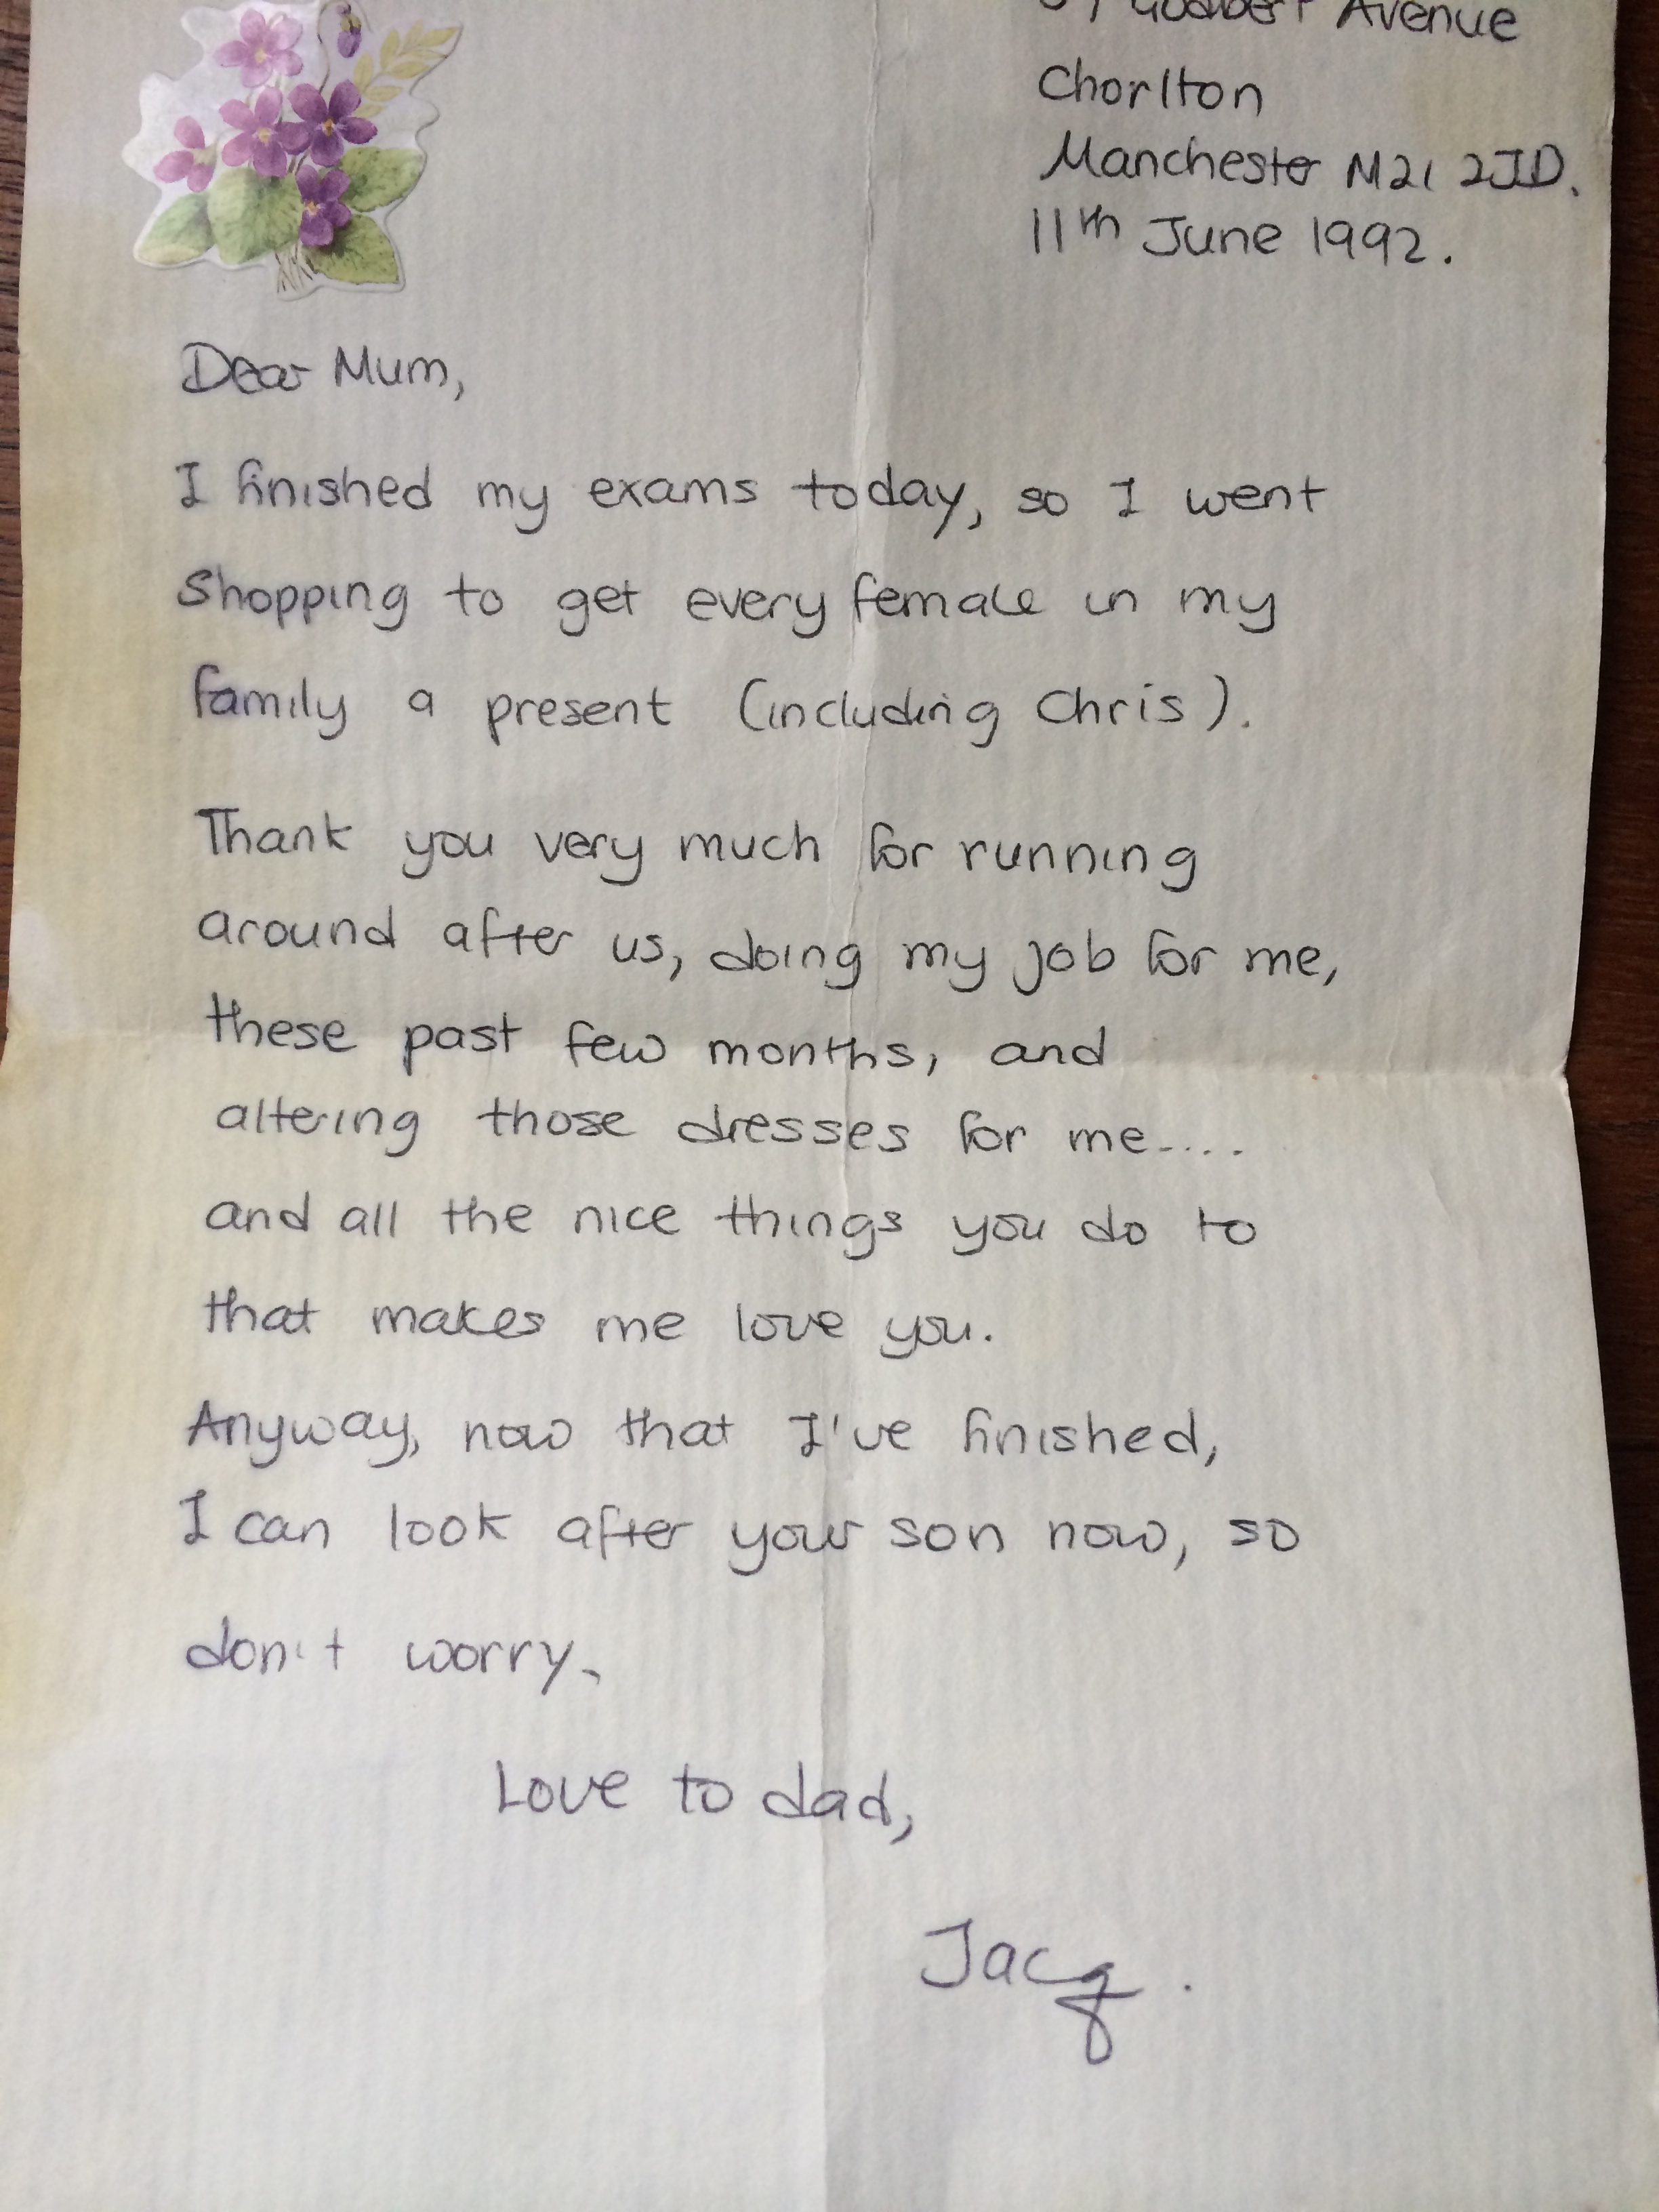 Love Letter to My Mother-in-Law